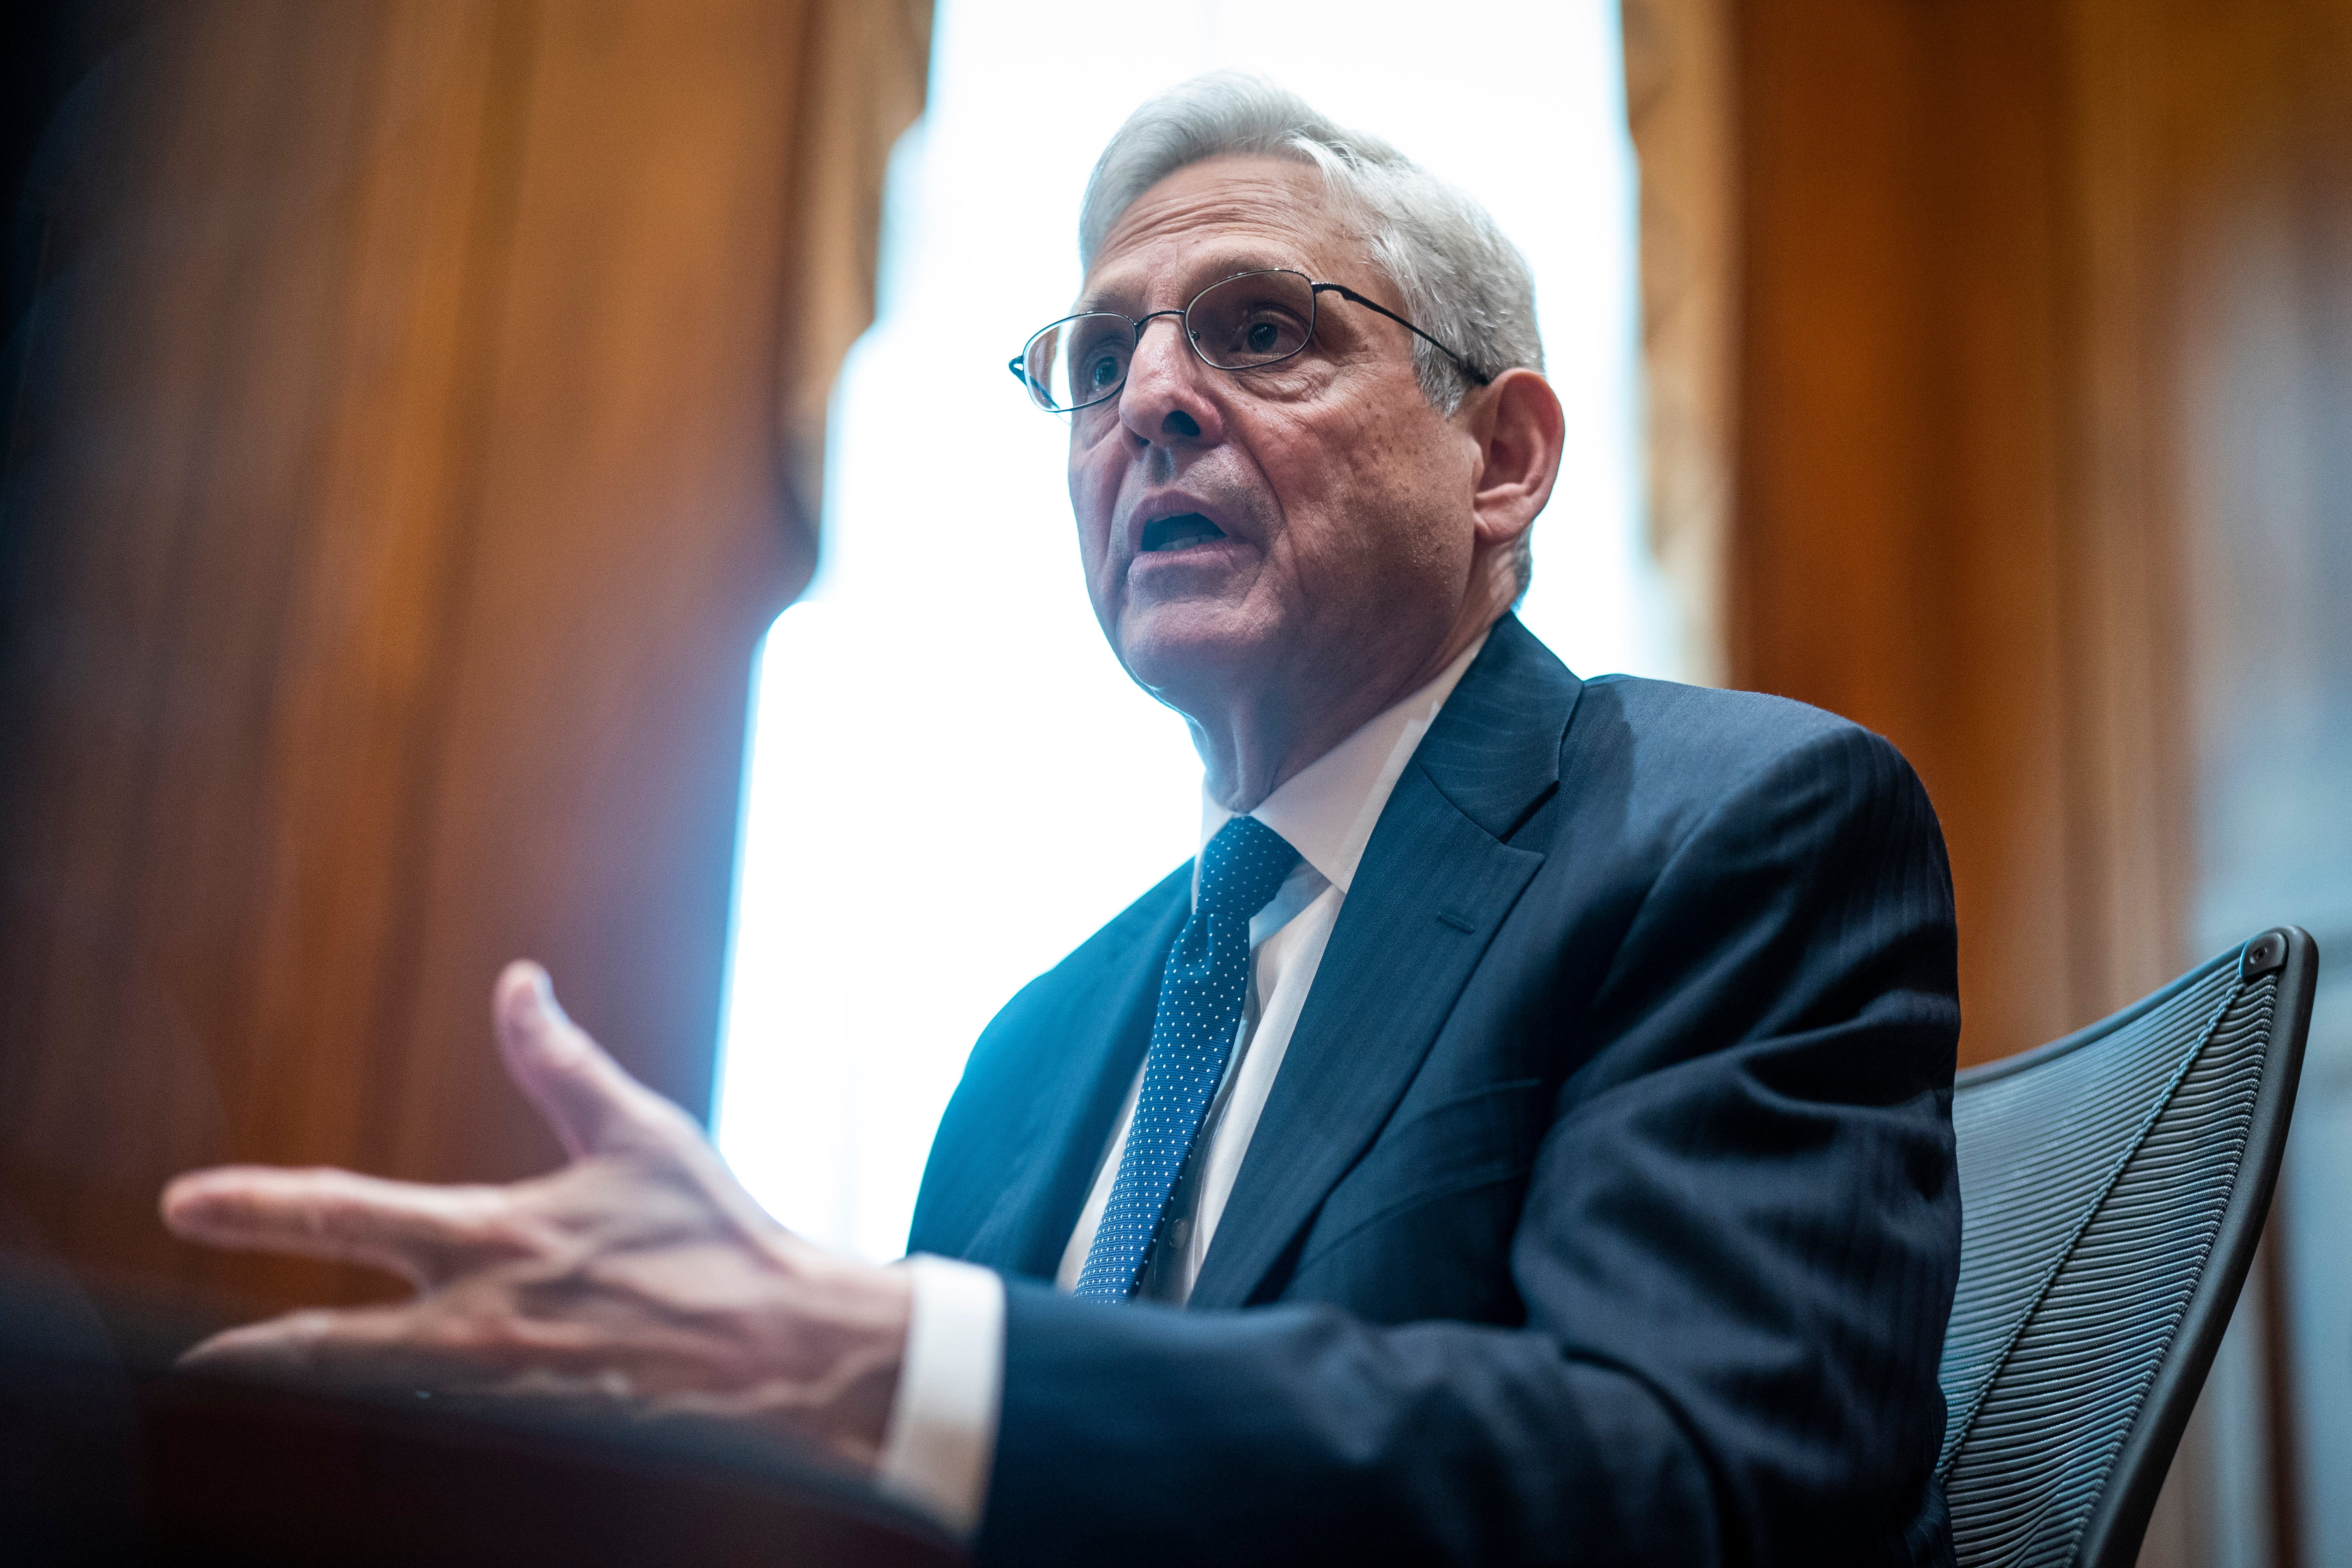 Attorney General Merrick Garland said that states may not ban mifepristone ‘based on a disagreement with the FDA's expert judgment.’